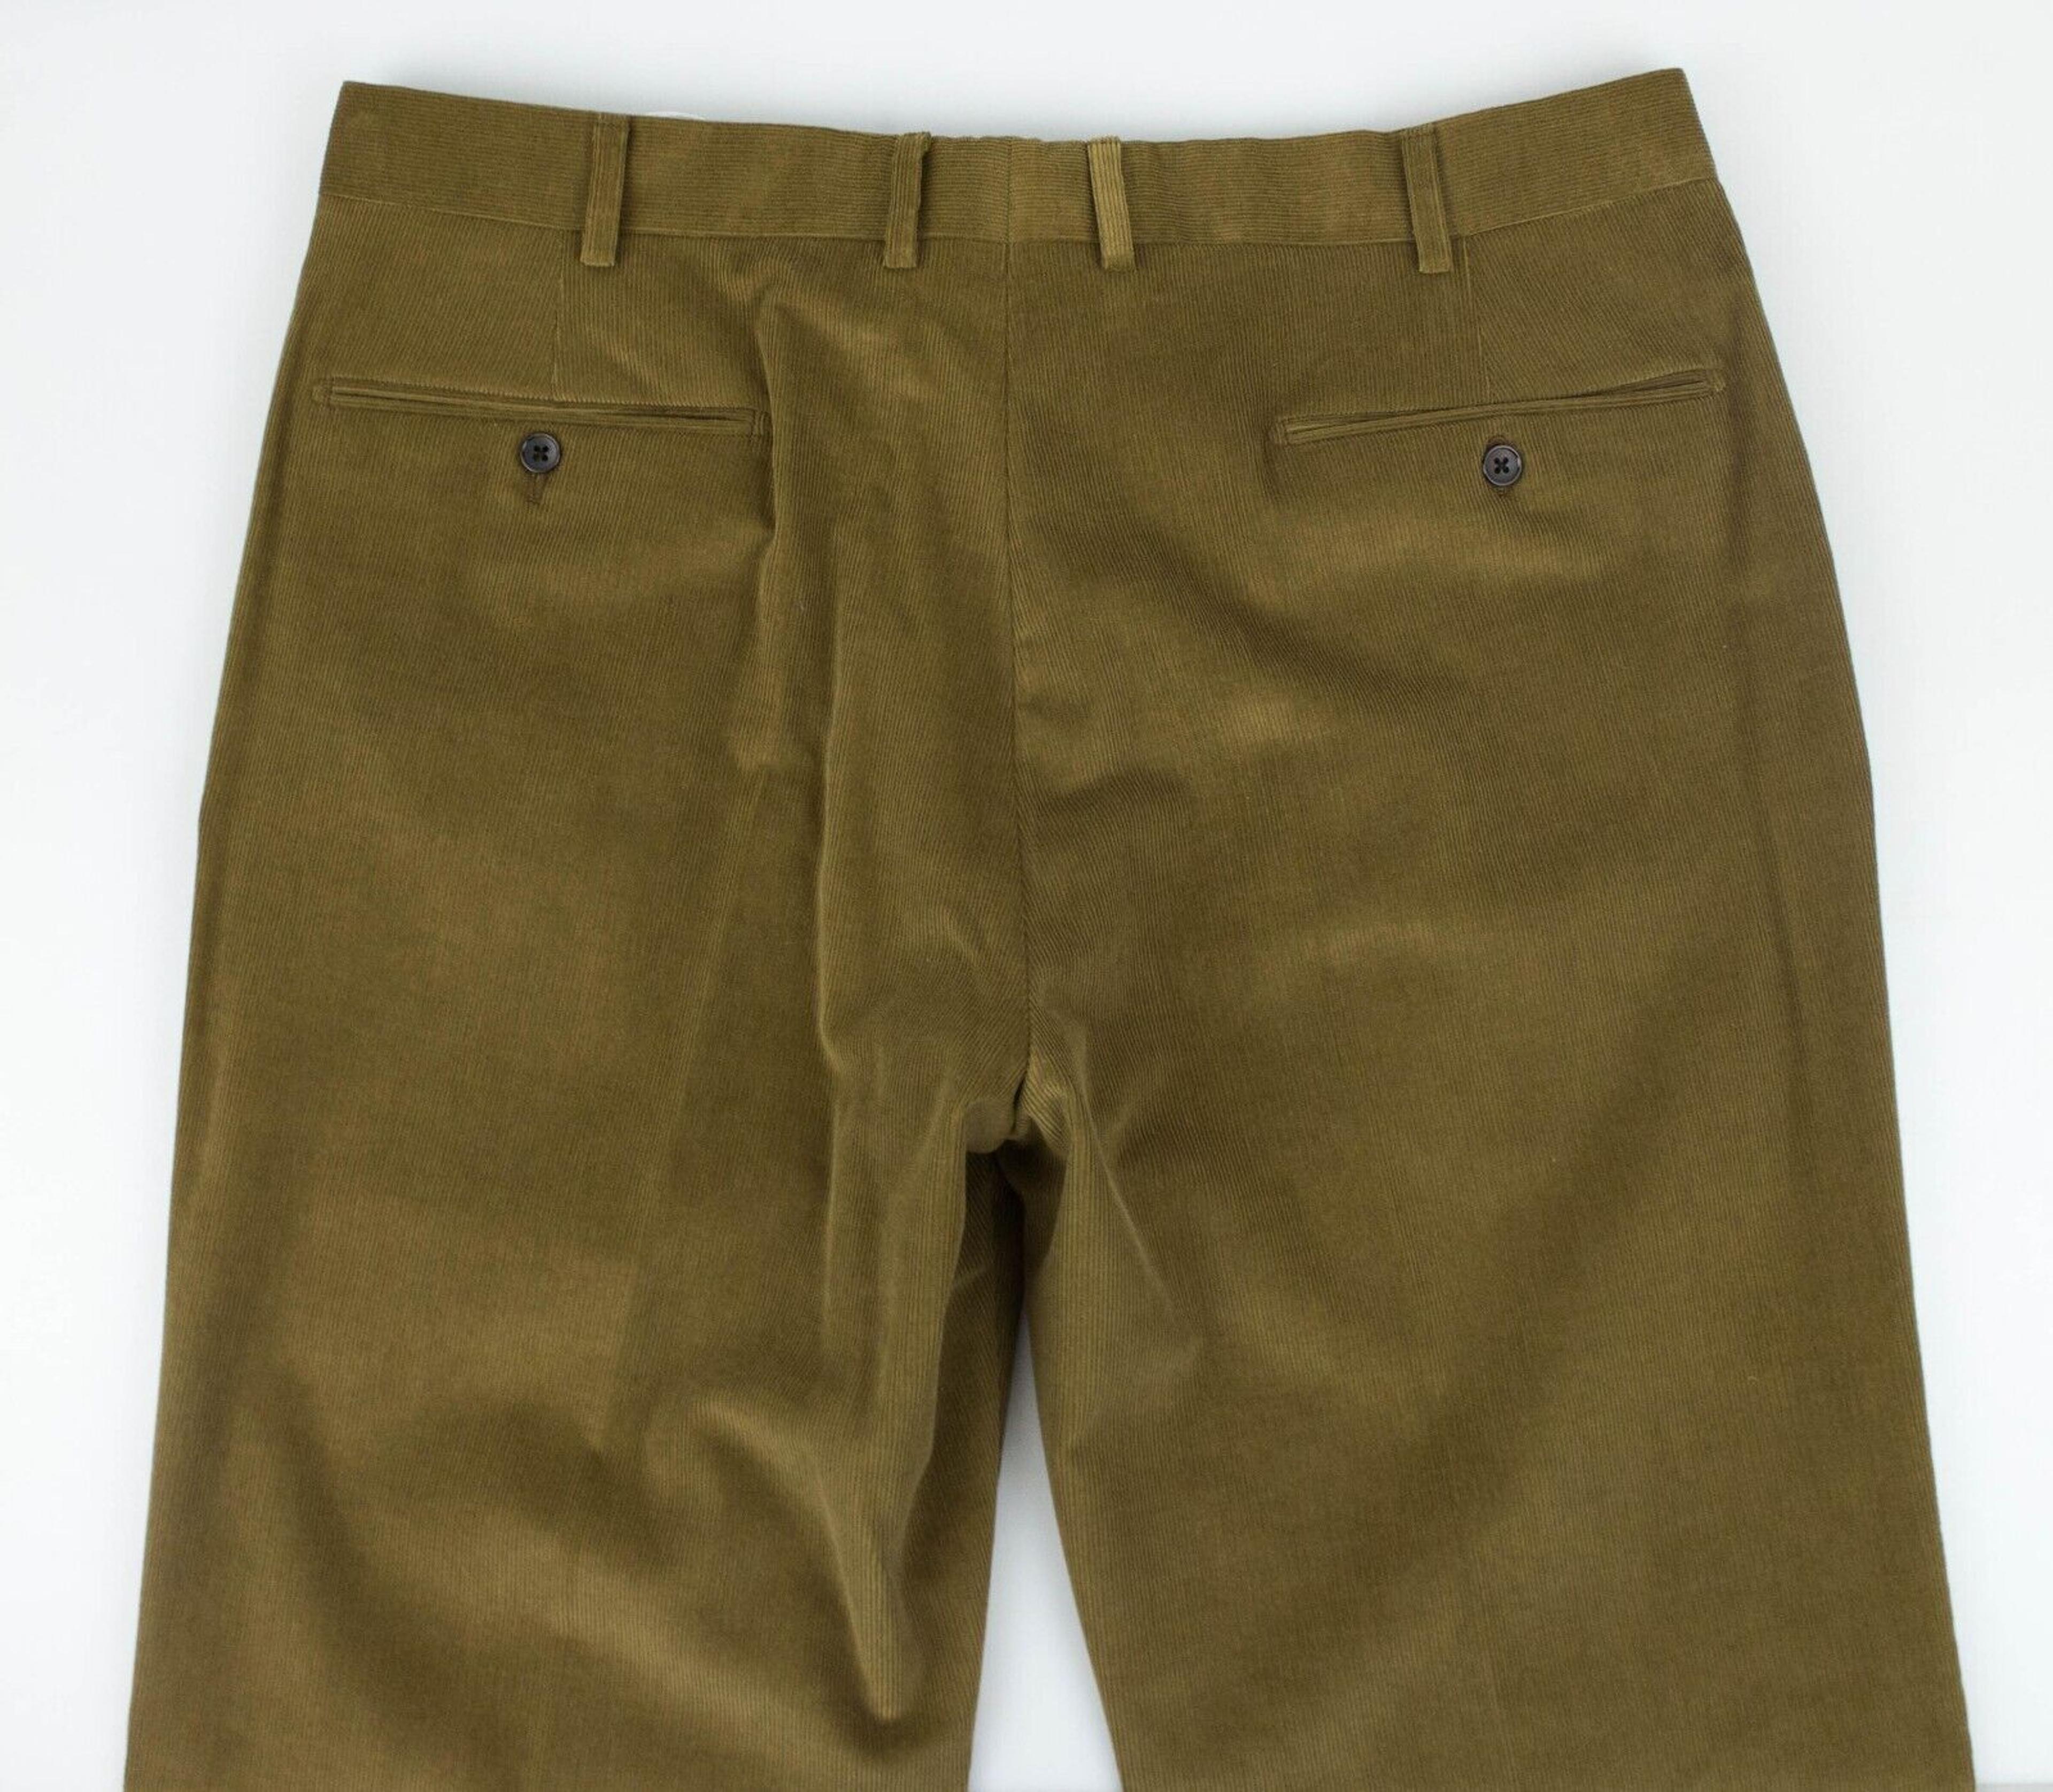 Alternate View 9 of Brown Cotton Blend Corduroy Casual Pants